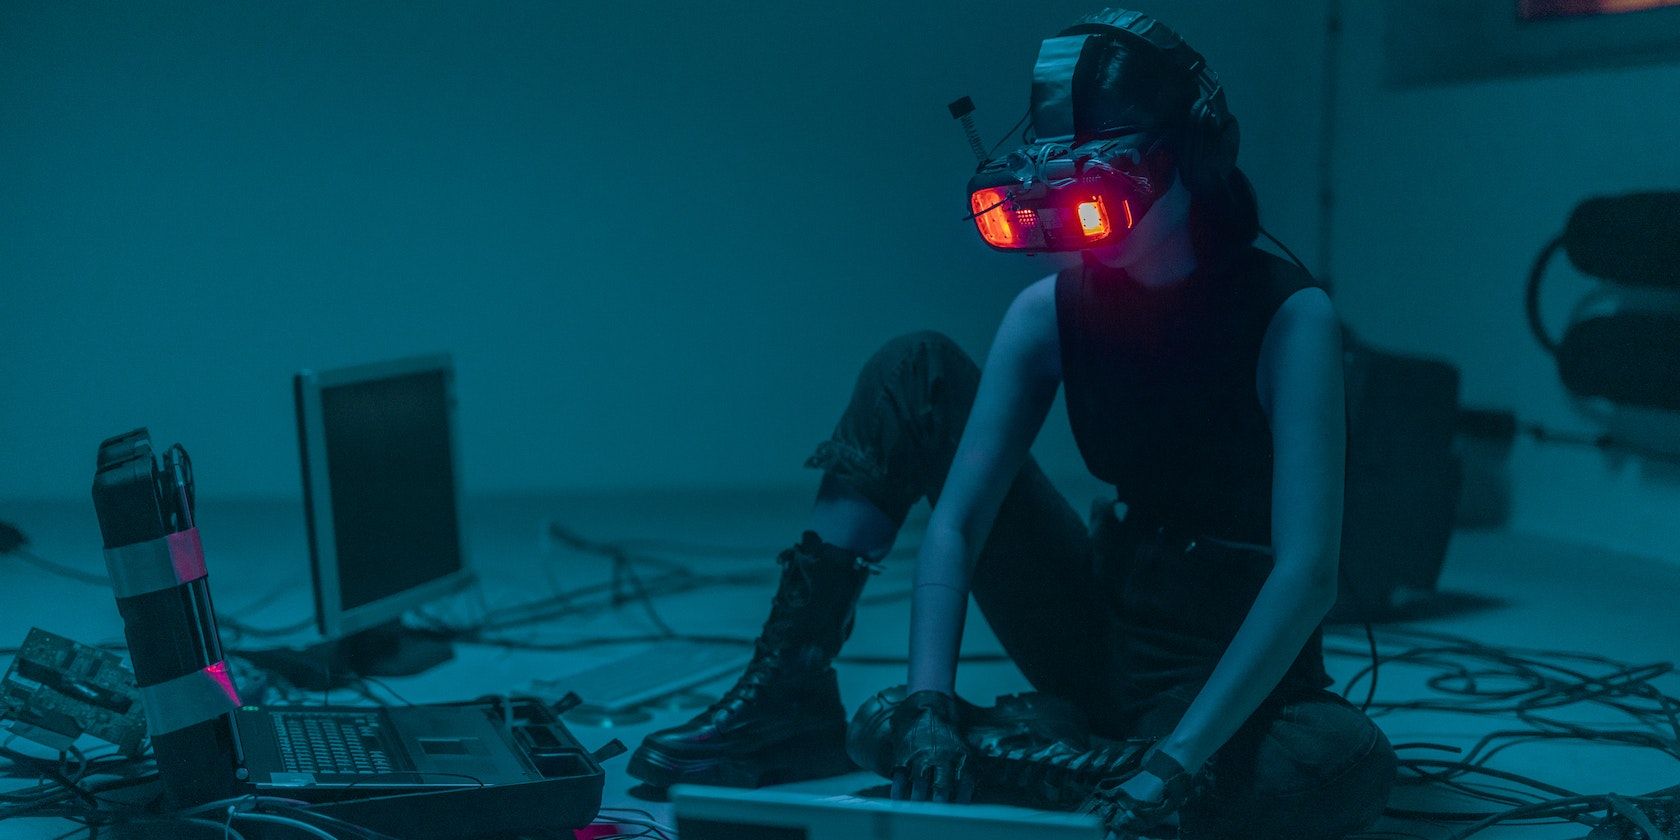 A Person Sitting on the Floor with Vr Goggles Using a Computer